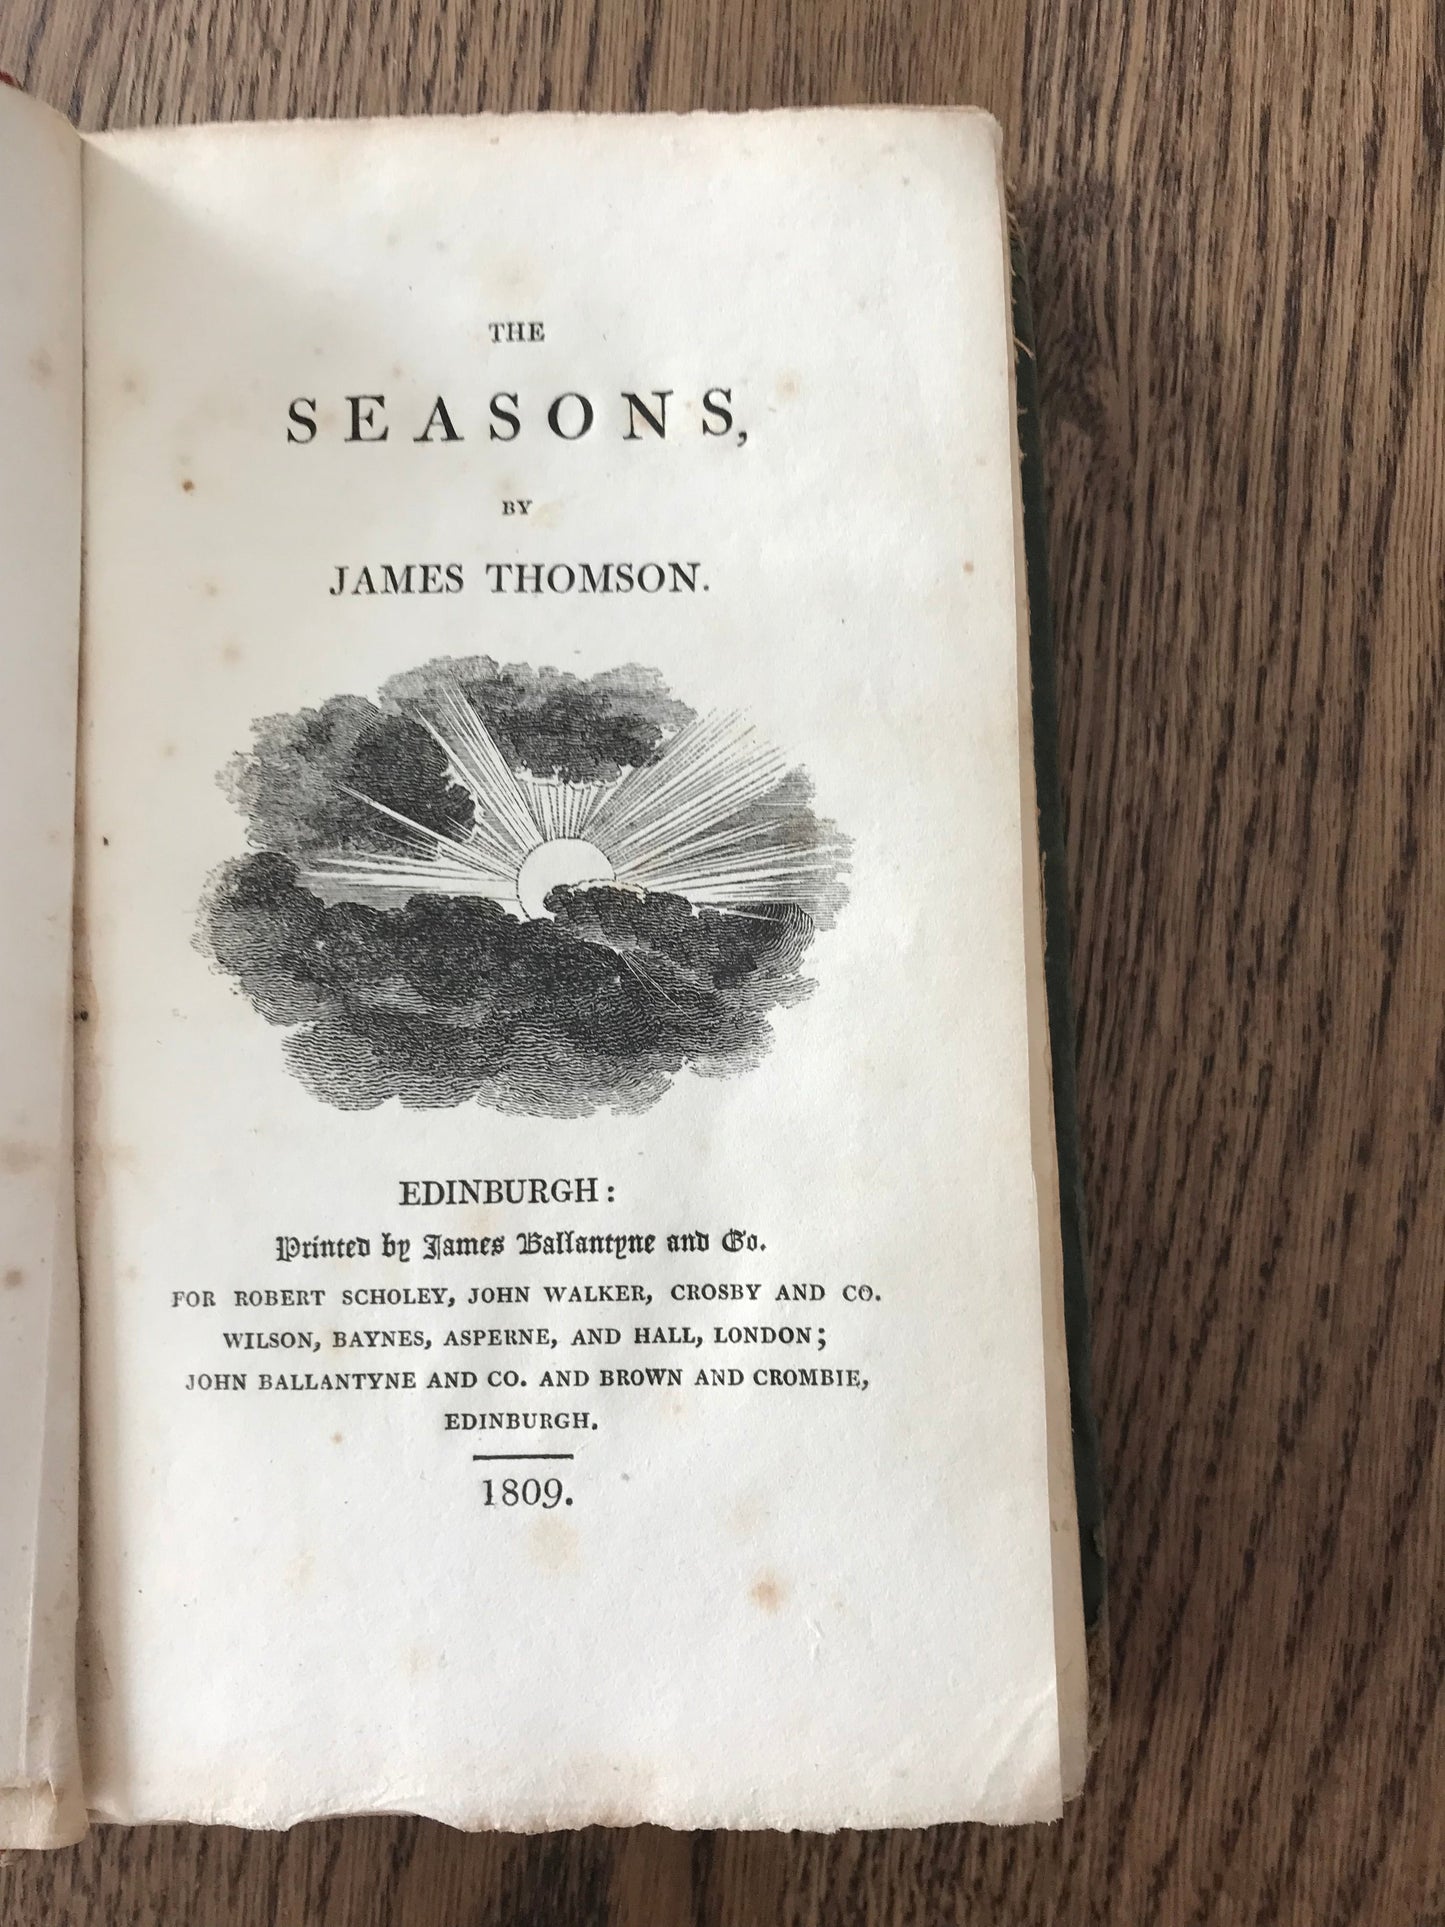 THE SEASONS AND OTHER POEMS BY JAMES THOMSON BooksCardsNBikes